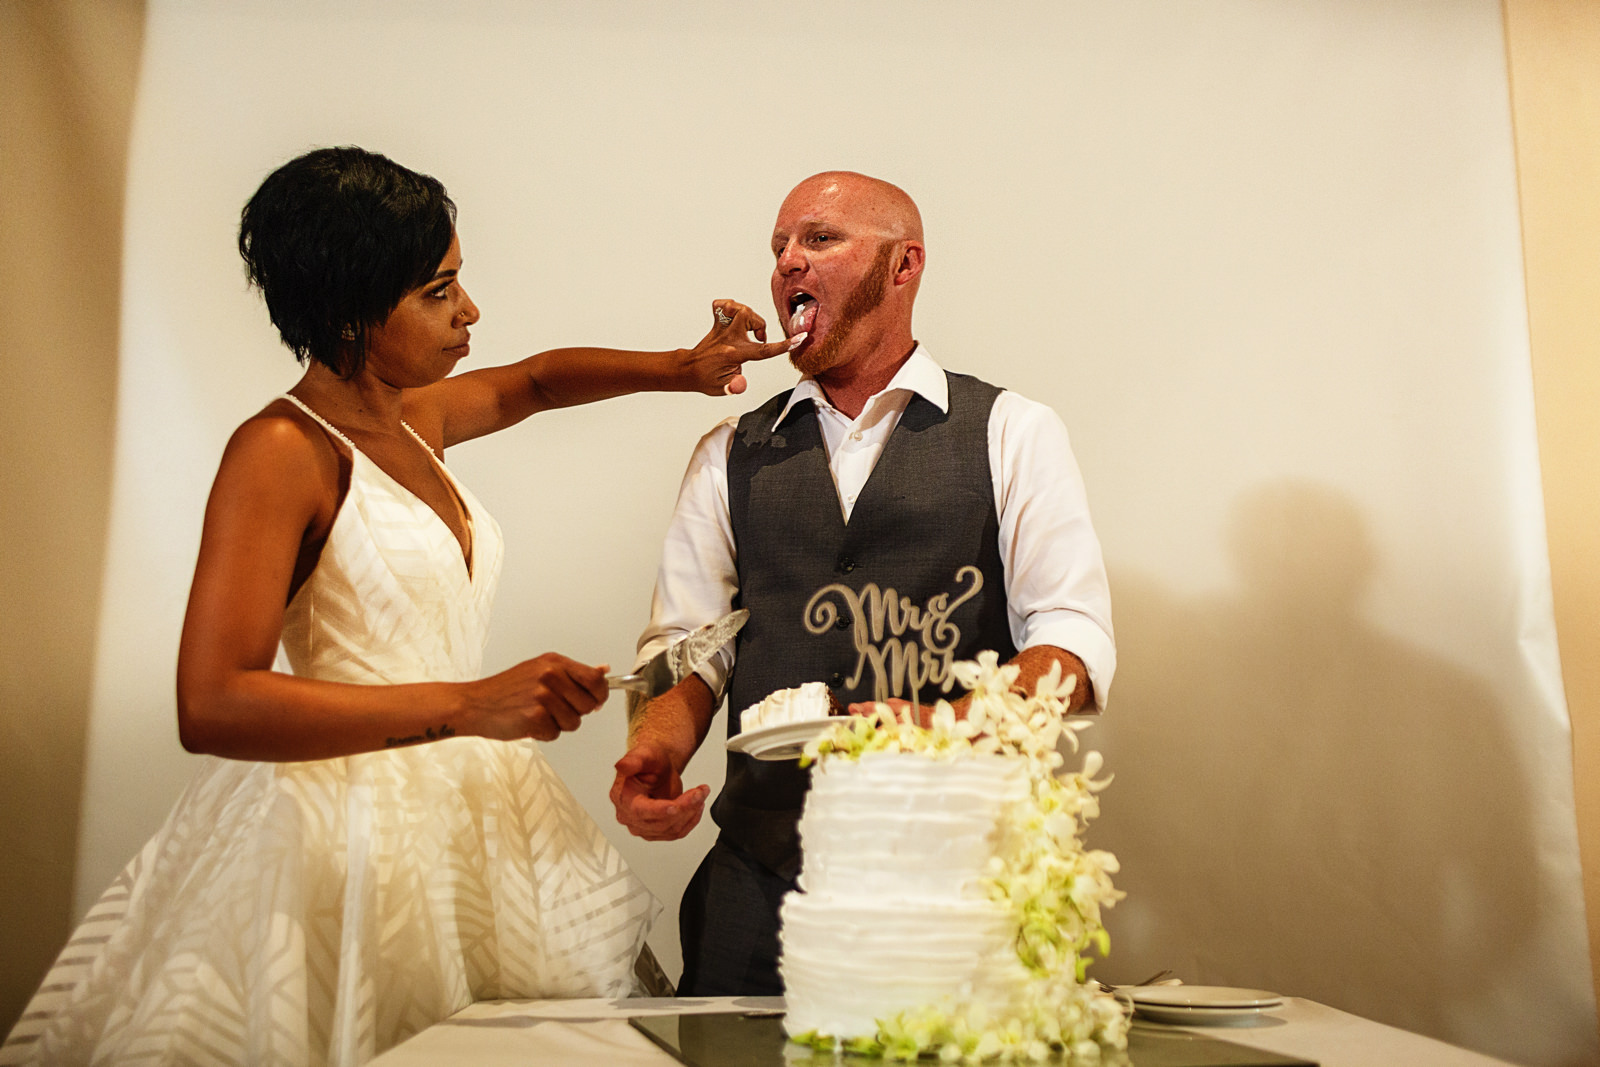 Bride feeds the groom with the cake's cream